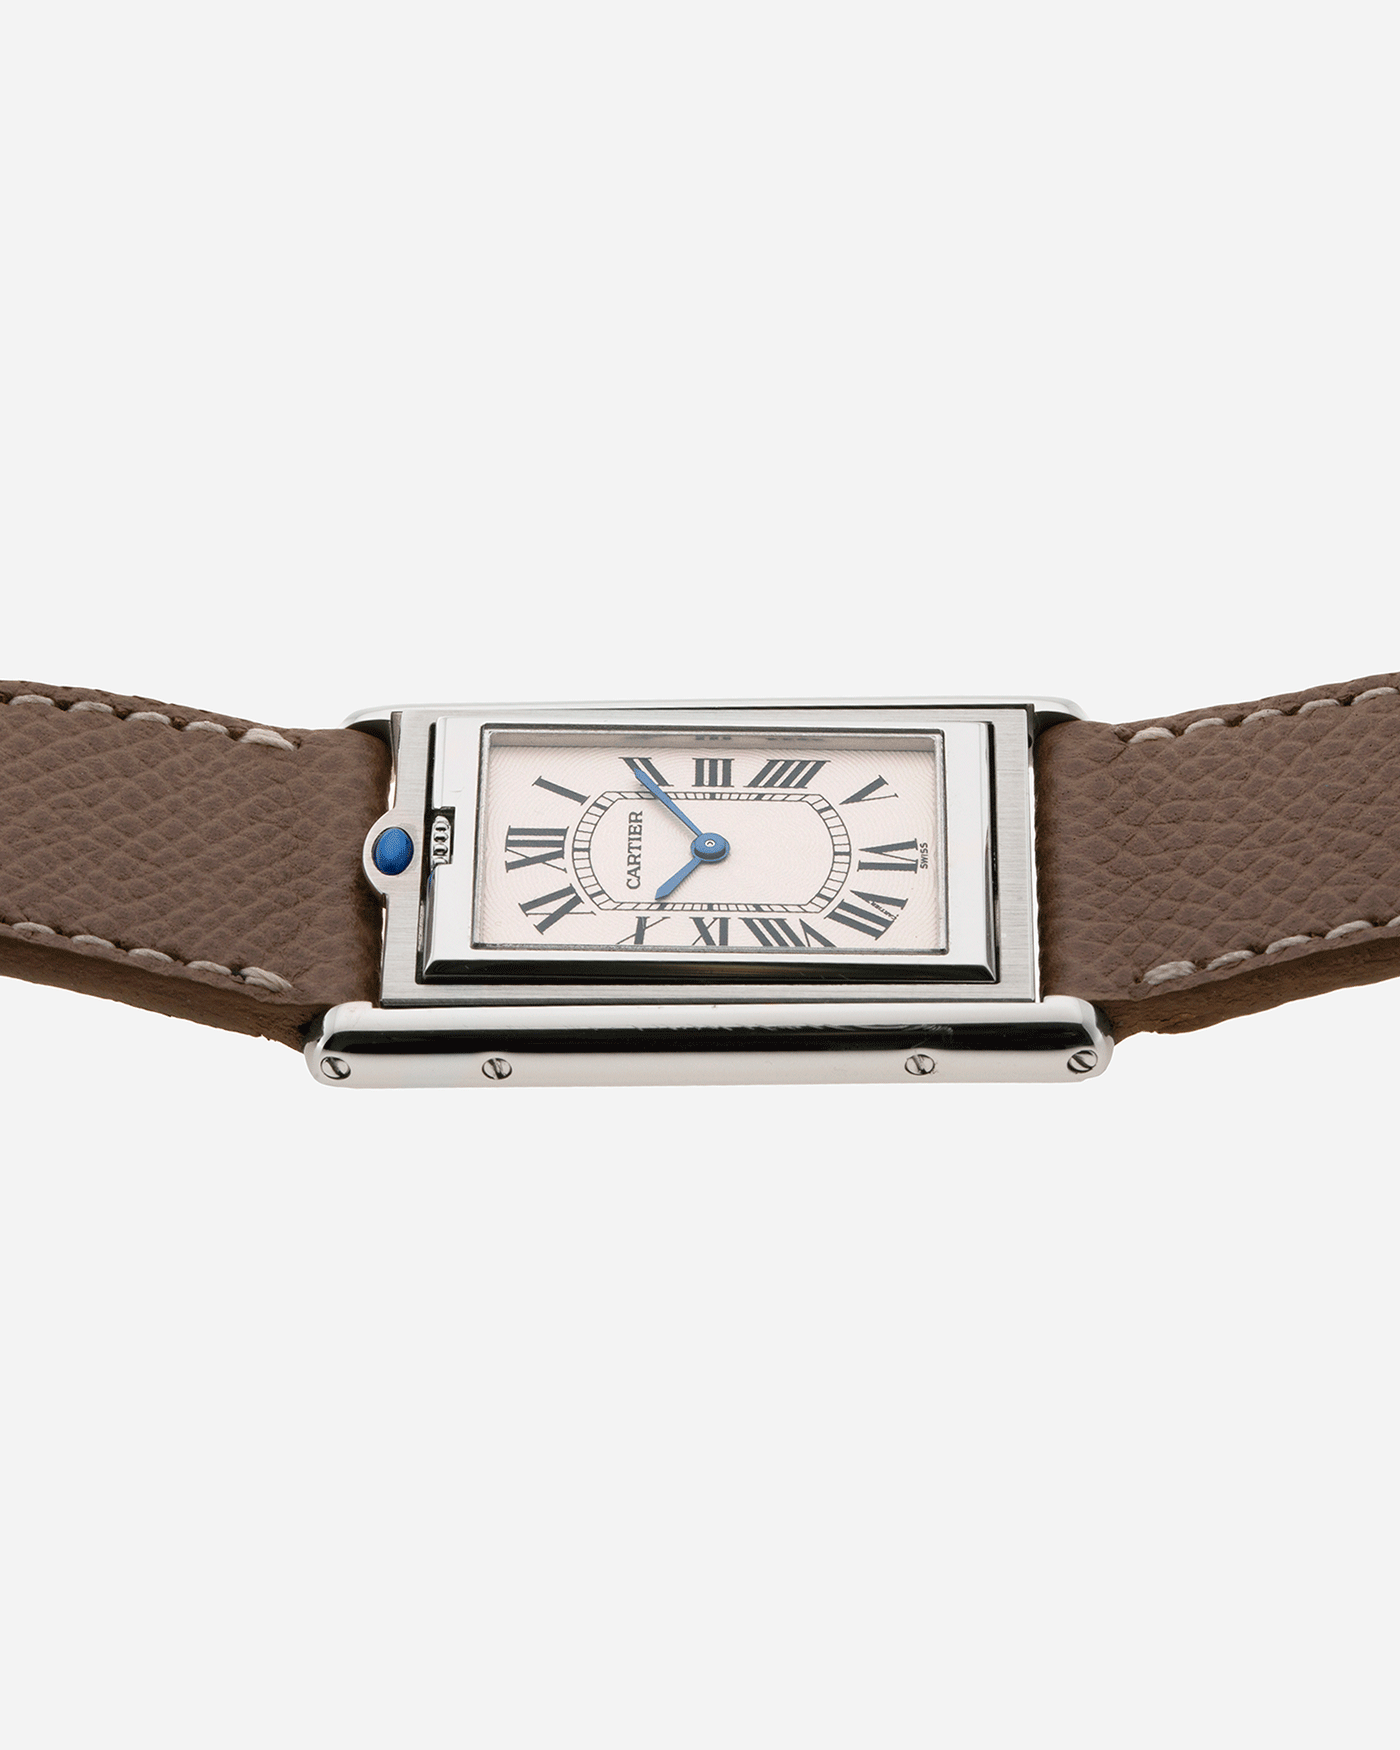  Brand: Cartier Year: 1999 Model: Tank Basculante Reference: 2390 Material: Stainless Steel Movement: Piguet-derived Cartier cal. 050 MC Case Diameter: 26 x 38mm Strap: Veblenist Taupe Grained Calf and Black Cartier Alligator with Cartier Stainless Steel Tang Buckle